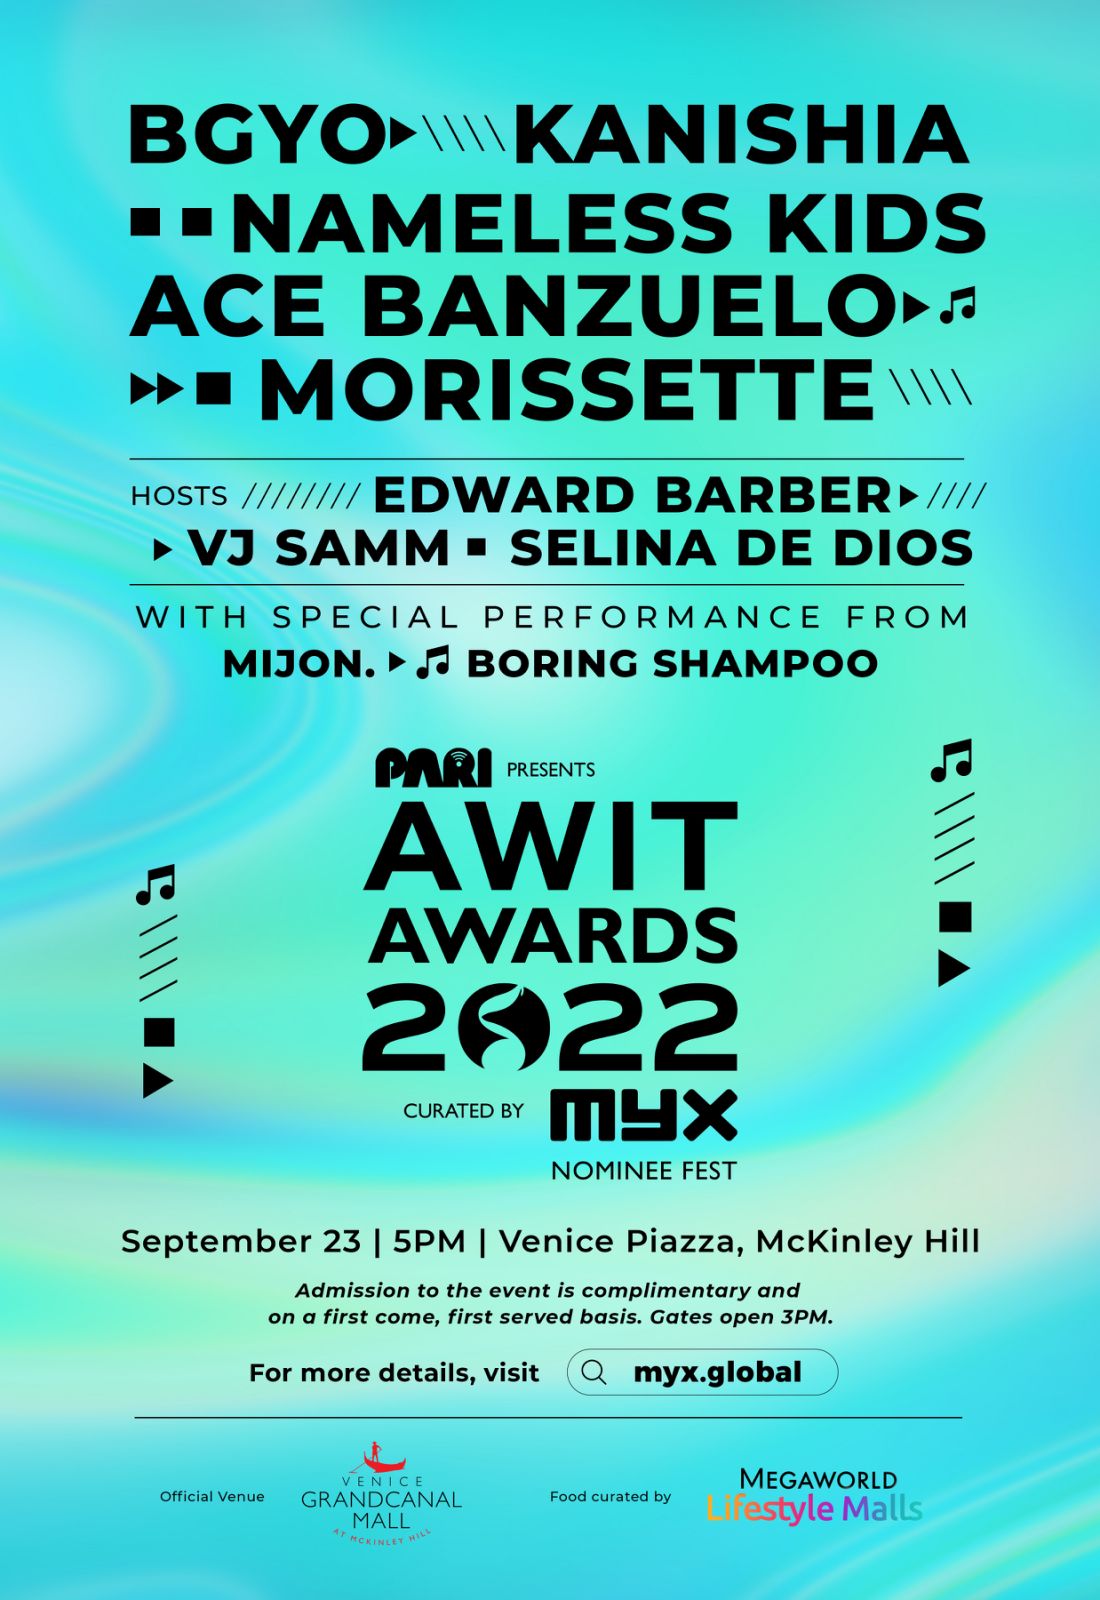 Admission is now complimentary to the Awit Awards 2022 Nomination Fest this Friday